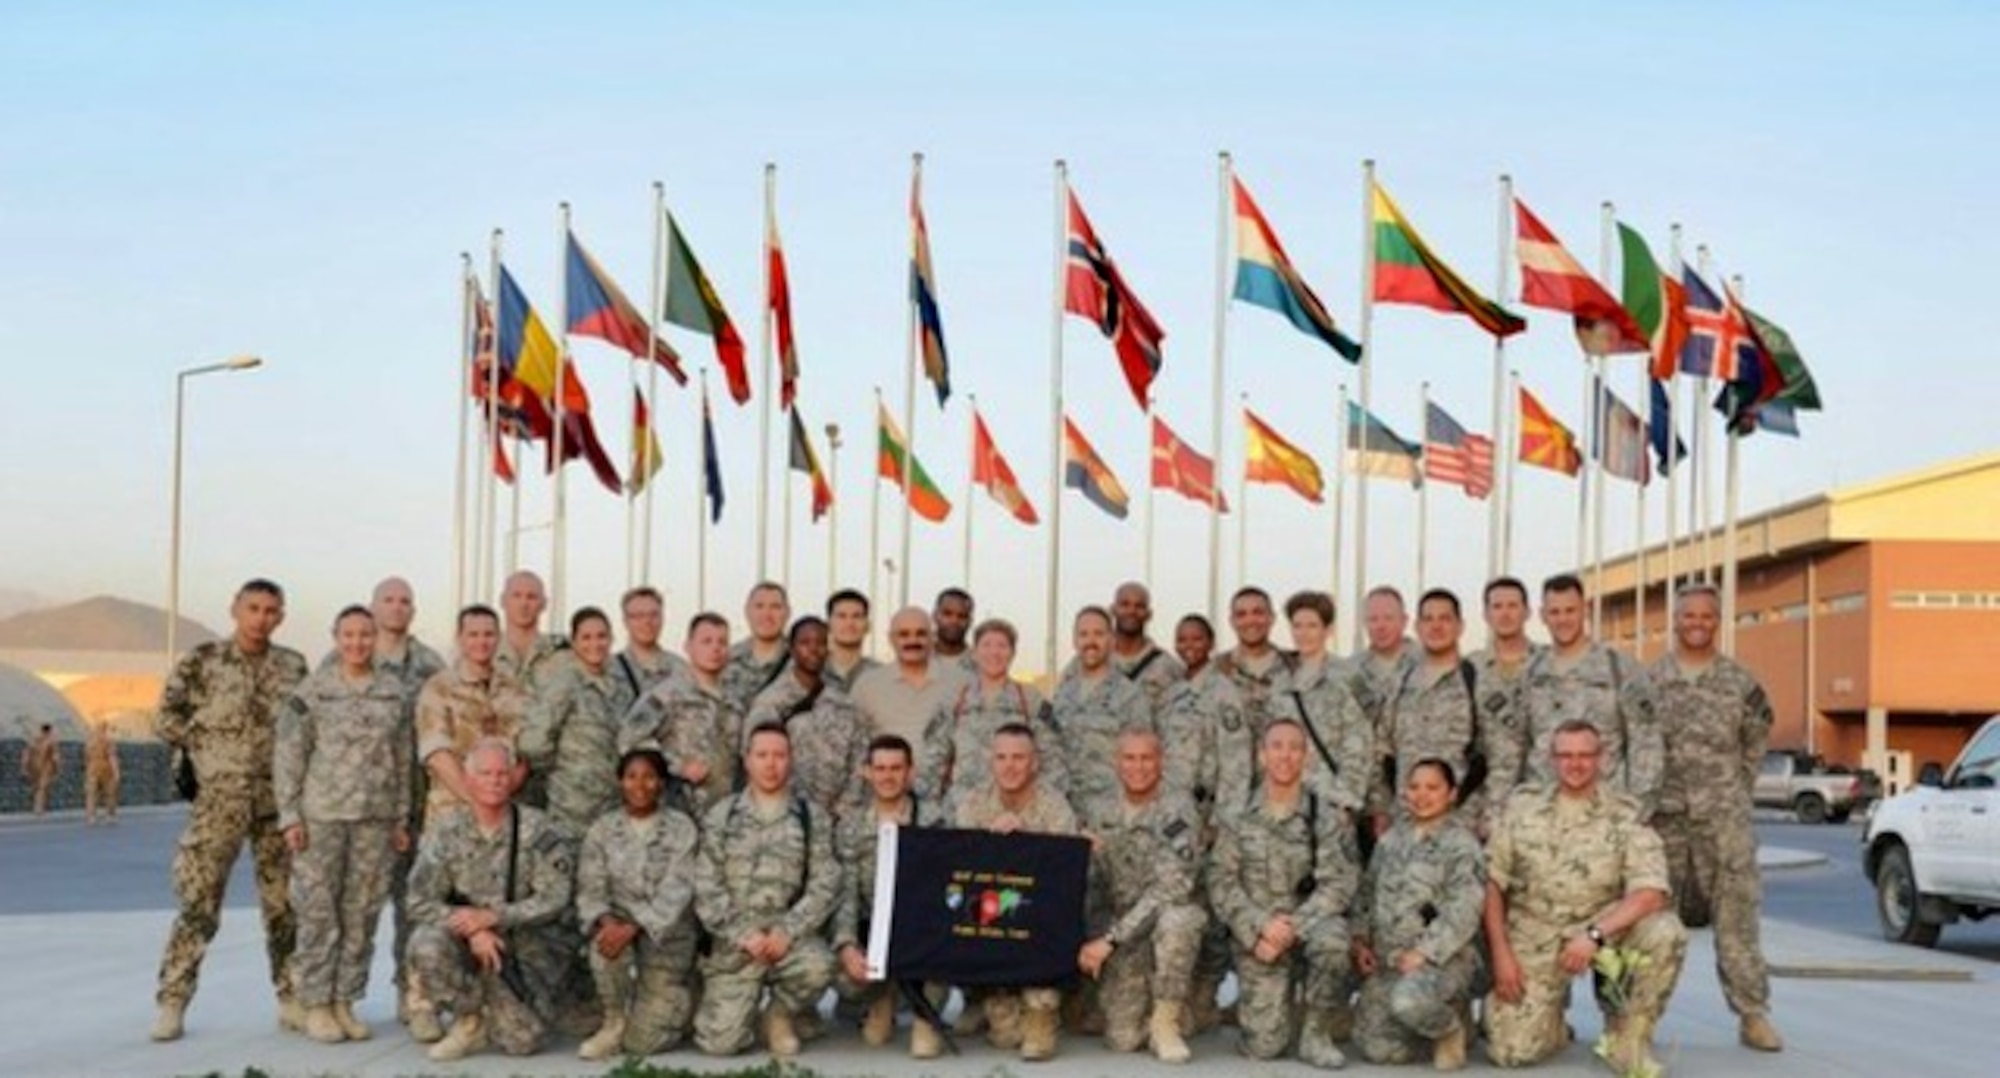 U.S. Air Force retired Tech. Sgt. Daylena Ricks, photojournalist, poses for a group photo with members of the International Security Assistance Force (ISAF) at Bagram Air Base, Afghanistan in 2010.